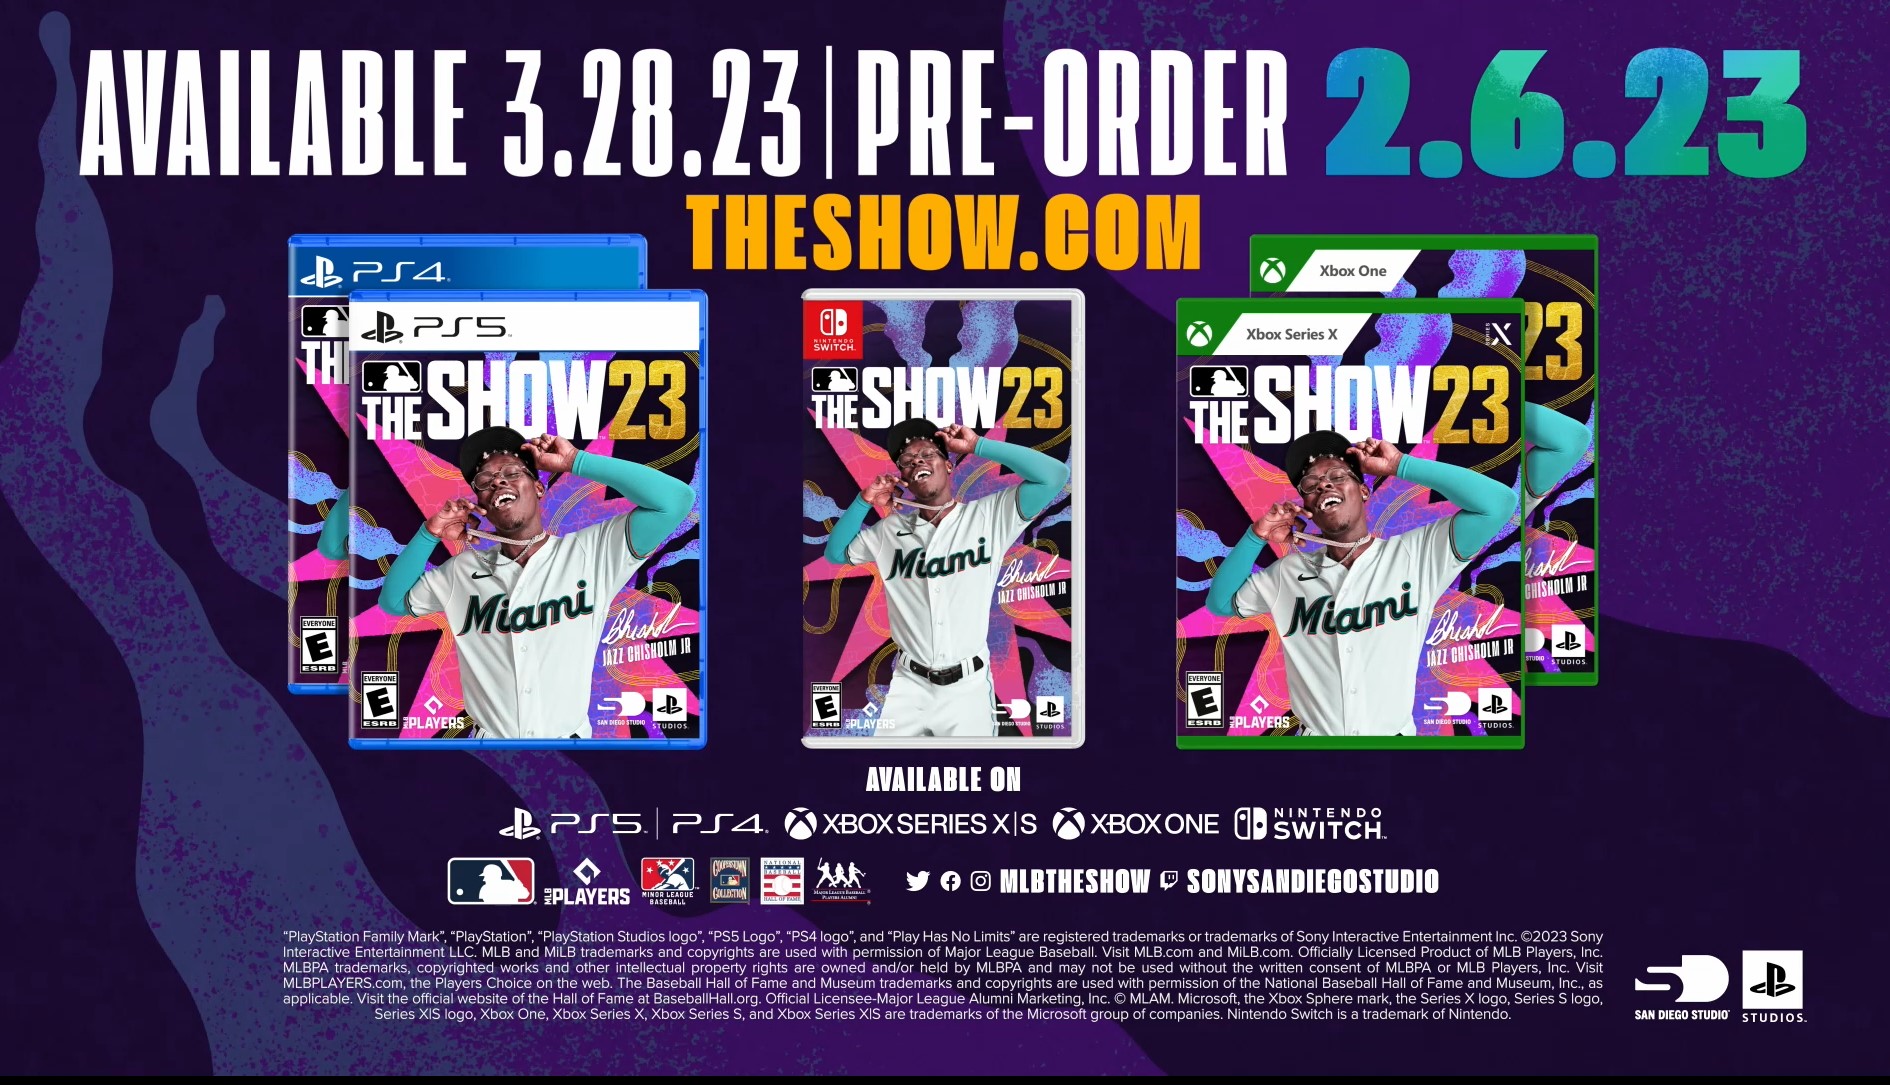 Why MLB The Show '23 selection of Marlins' Jazz Chisholm as cover